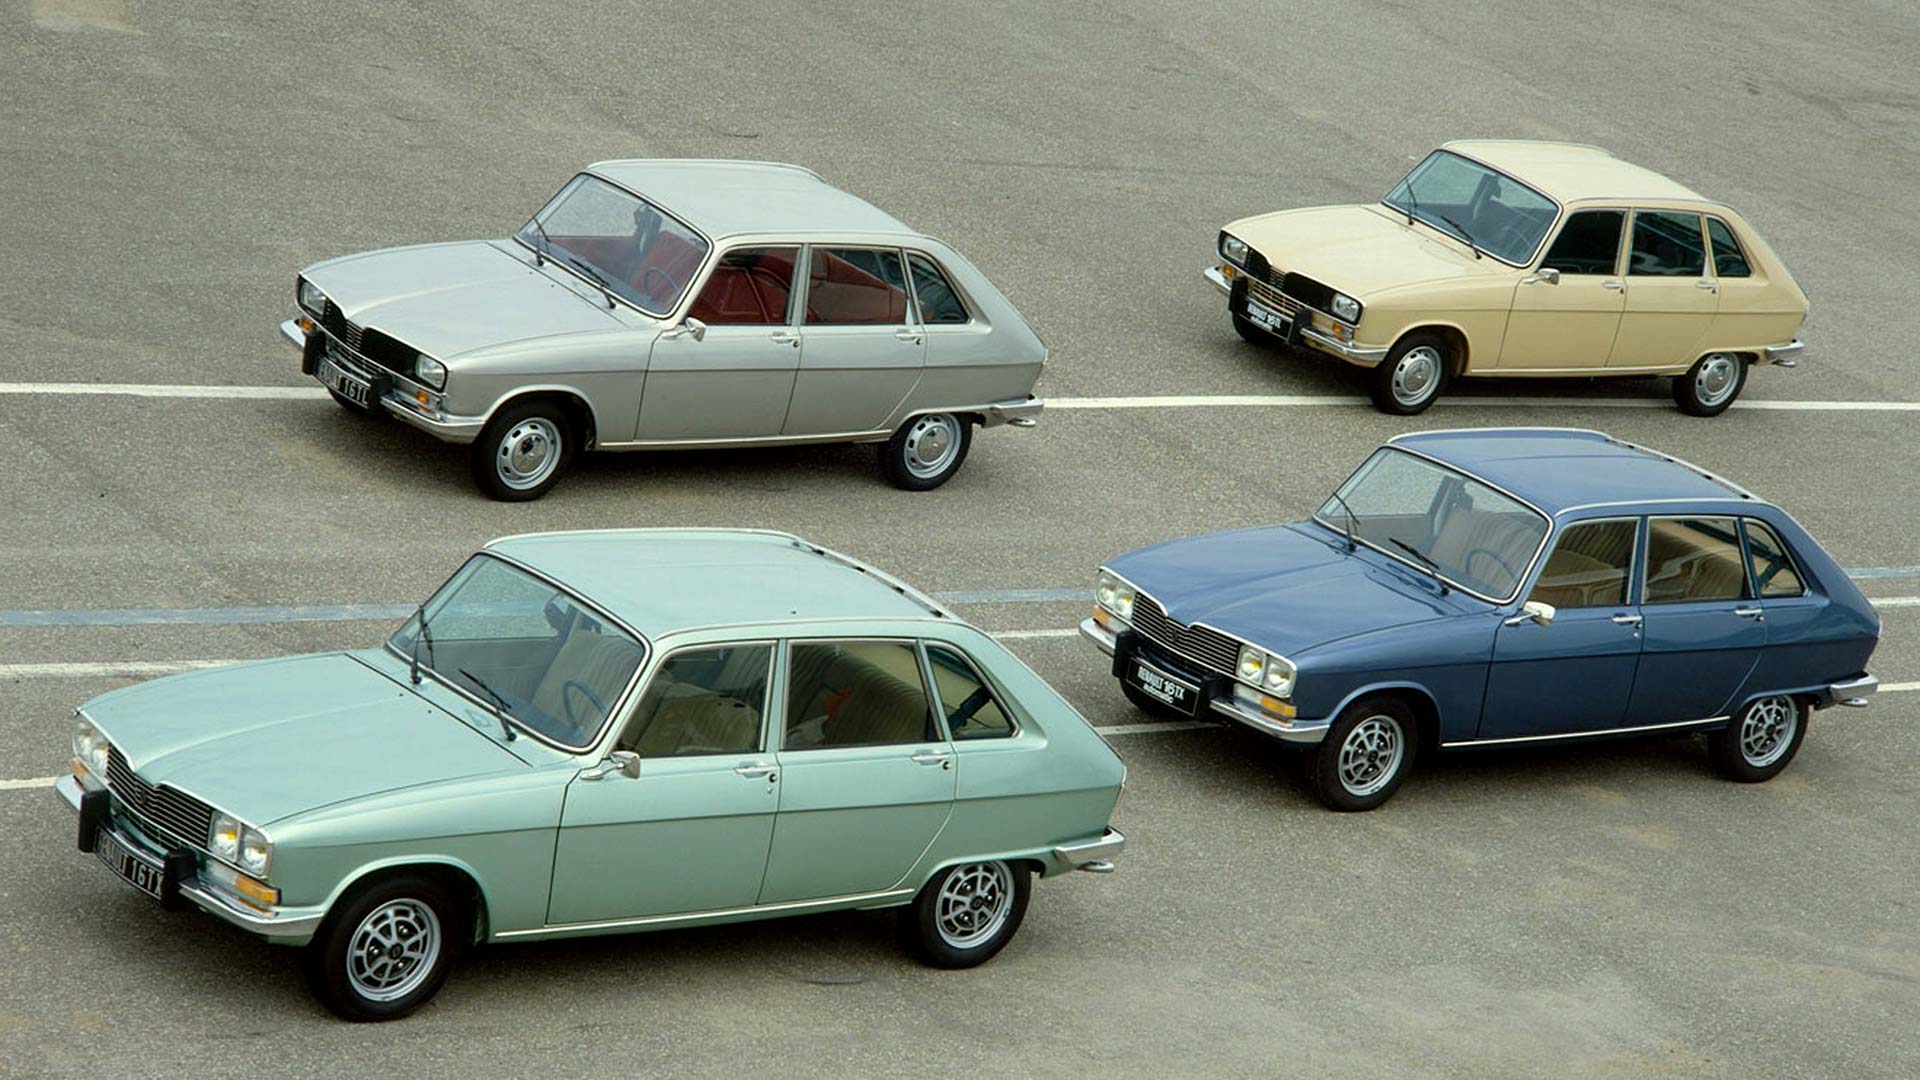 History of the Renault 16